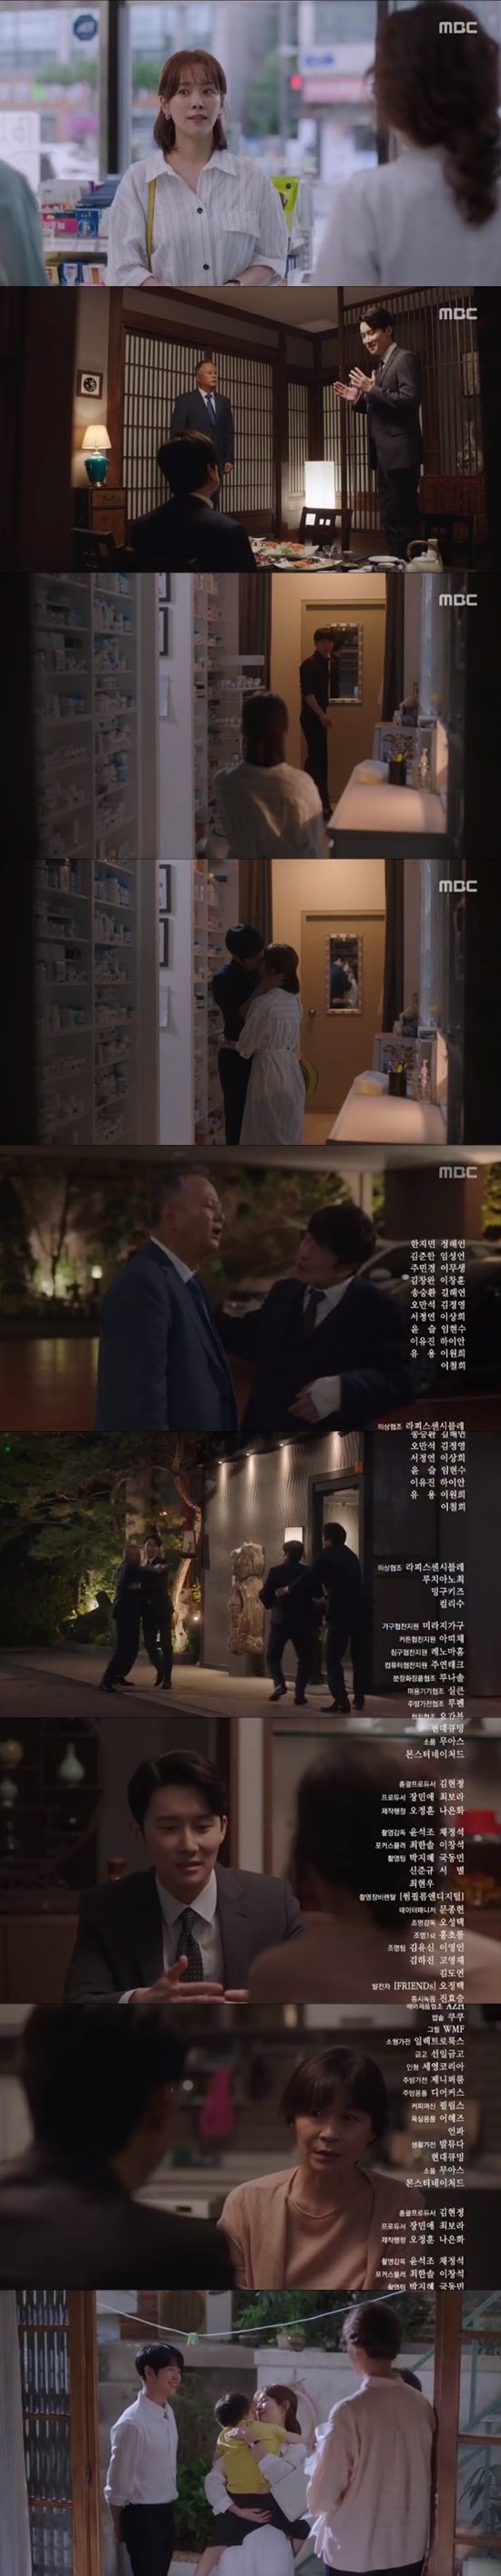 Han Ji-min has wondered if the kiss reunion will be a wedding happy endings.In the 29-30 episode of MBCs tree drama Spring Night (played by Kim Eun/director Ahn Pan-seok), which aired on July 10, Lee Jung-in (Han Ji-min) and Yoo Ji-Ho (Jeong Hae-in) overcame the breakup crisis.Yoo Ji-Ho was anxious to ask Choi Jung-in, who was drunk at the news of her marriage, Will Choi Jung-in abandon us? And Choi Jung-in was angry when she found out that Yoo Ji-Ho was drunk because of her mother.Lee Jung-in was worried that Yoo Ji-Ho had not forgotten his mother, and misunderstood that he did not believe in himself who had already betrayed Kwon Ki-seok (Kim Jun-han).Kwon Gi-seok was waiting for Choi Jung-in, who came home in such a conflict, and Choi Jung-in asked in a complicated mind, Can you believe me if I have already betrayed once?Kwon Ki-seok smiled after noticing the conflict between Choi Jung-in and saying, I can believe it.Kwon Gi-seok then gave Yoo Ji-Ho Friend Choi Hyun-soo (Lim Hyun-soo) a nuance that seemed to break up with Choi Jung-in.Choi Hyun-soo was worried about Friend Yoo Ji-Ho, and the uneasy Yoo Ji-Ho met Kwon Ki-seok and said, How do you get rid of Choi Jung-ins life completely?When Yoo Ji-Ho asked, If I give up, will I meet Choi Jung-in again? Kwon Ki-seok said, Who will meet?You know, my goal is to be Yoo Ji-Ho. If Choi Jung-in comes back, there is nothing to meet. An angry Yoo Ji-Ho said, The story is not a warning from now on. Blackmail – Cinémix Par Chloé.I remember saying that there is nothing else to fear about the child. How do you write that, me and my son, illegally filmed?I even told him it was my fathers, and I didnt go over it because I didnt feel sick, he warned.The nervous Kwon Ki-seok made a dinner appointment with his father, Lee Tae-hak (Song Seung-hwan), and called his father, Kwon Young-guk (Kim Chang-wan), to show as if the promise had coincidentally overlapped.Kwon Ki-seok showed the floor on the spot, trying to catch the wedding date with Choi Jung-in.In the meantime, Lee Jung-in went to Yoo Ji-Hos pharmacy as if he had been convinced by his mother, Shin Hyung-sun (Gil Hae-yeon), and the two reunited with Kiss.In the following trailer, Lee Tae-hak, Kwon Young-guk, fought against Kwon Ki-seoks intention, and Kwon Ki-seok met Lee Choi Jung-ins mother, Shin Hyung-sun, and said, Yoo Ji-Ho quality is bad.Blackmail – Cinémix Par Chloé is the picture of the photo, Is it for money?Yoo Gyeong-sang